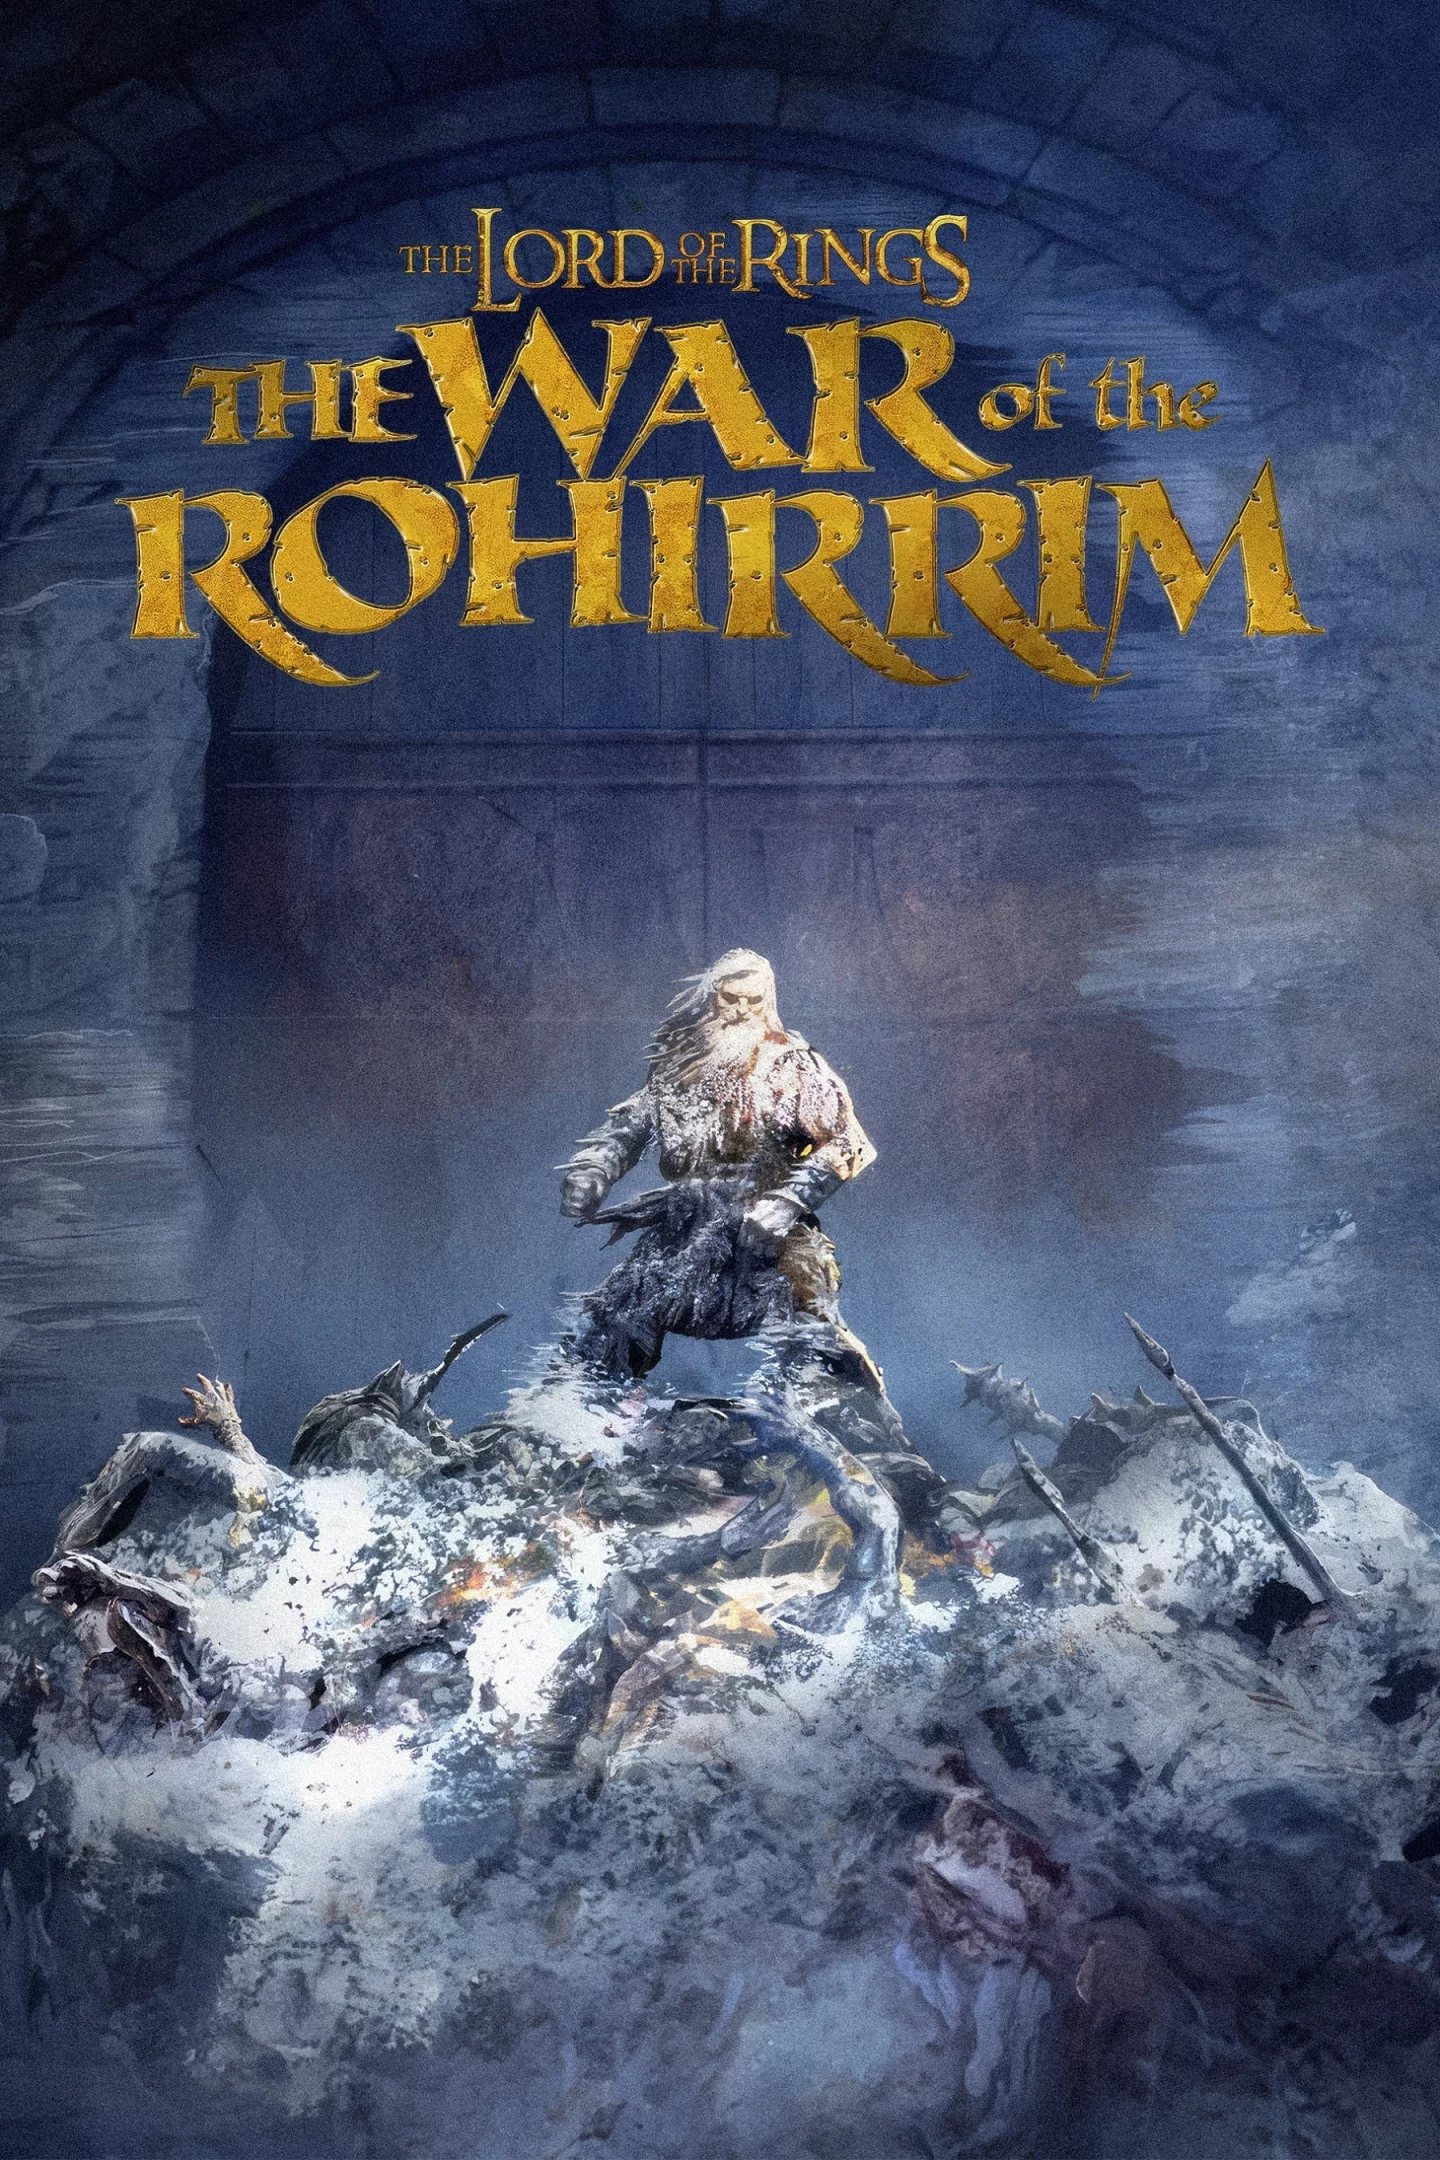 Photo 5 du film : The Lord of the Rings : The War of the Rohirrim